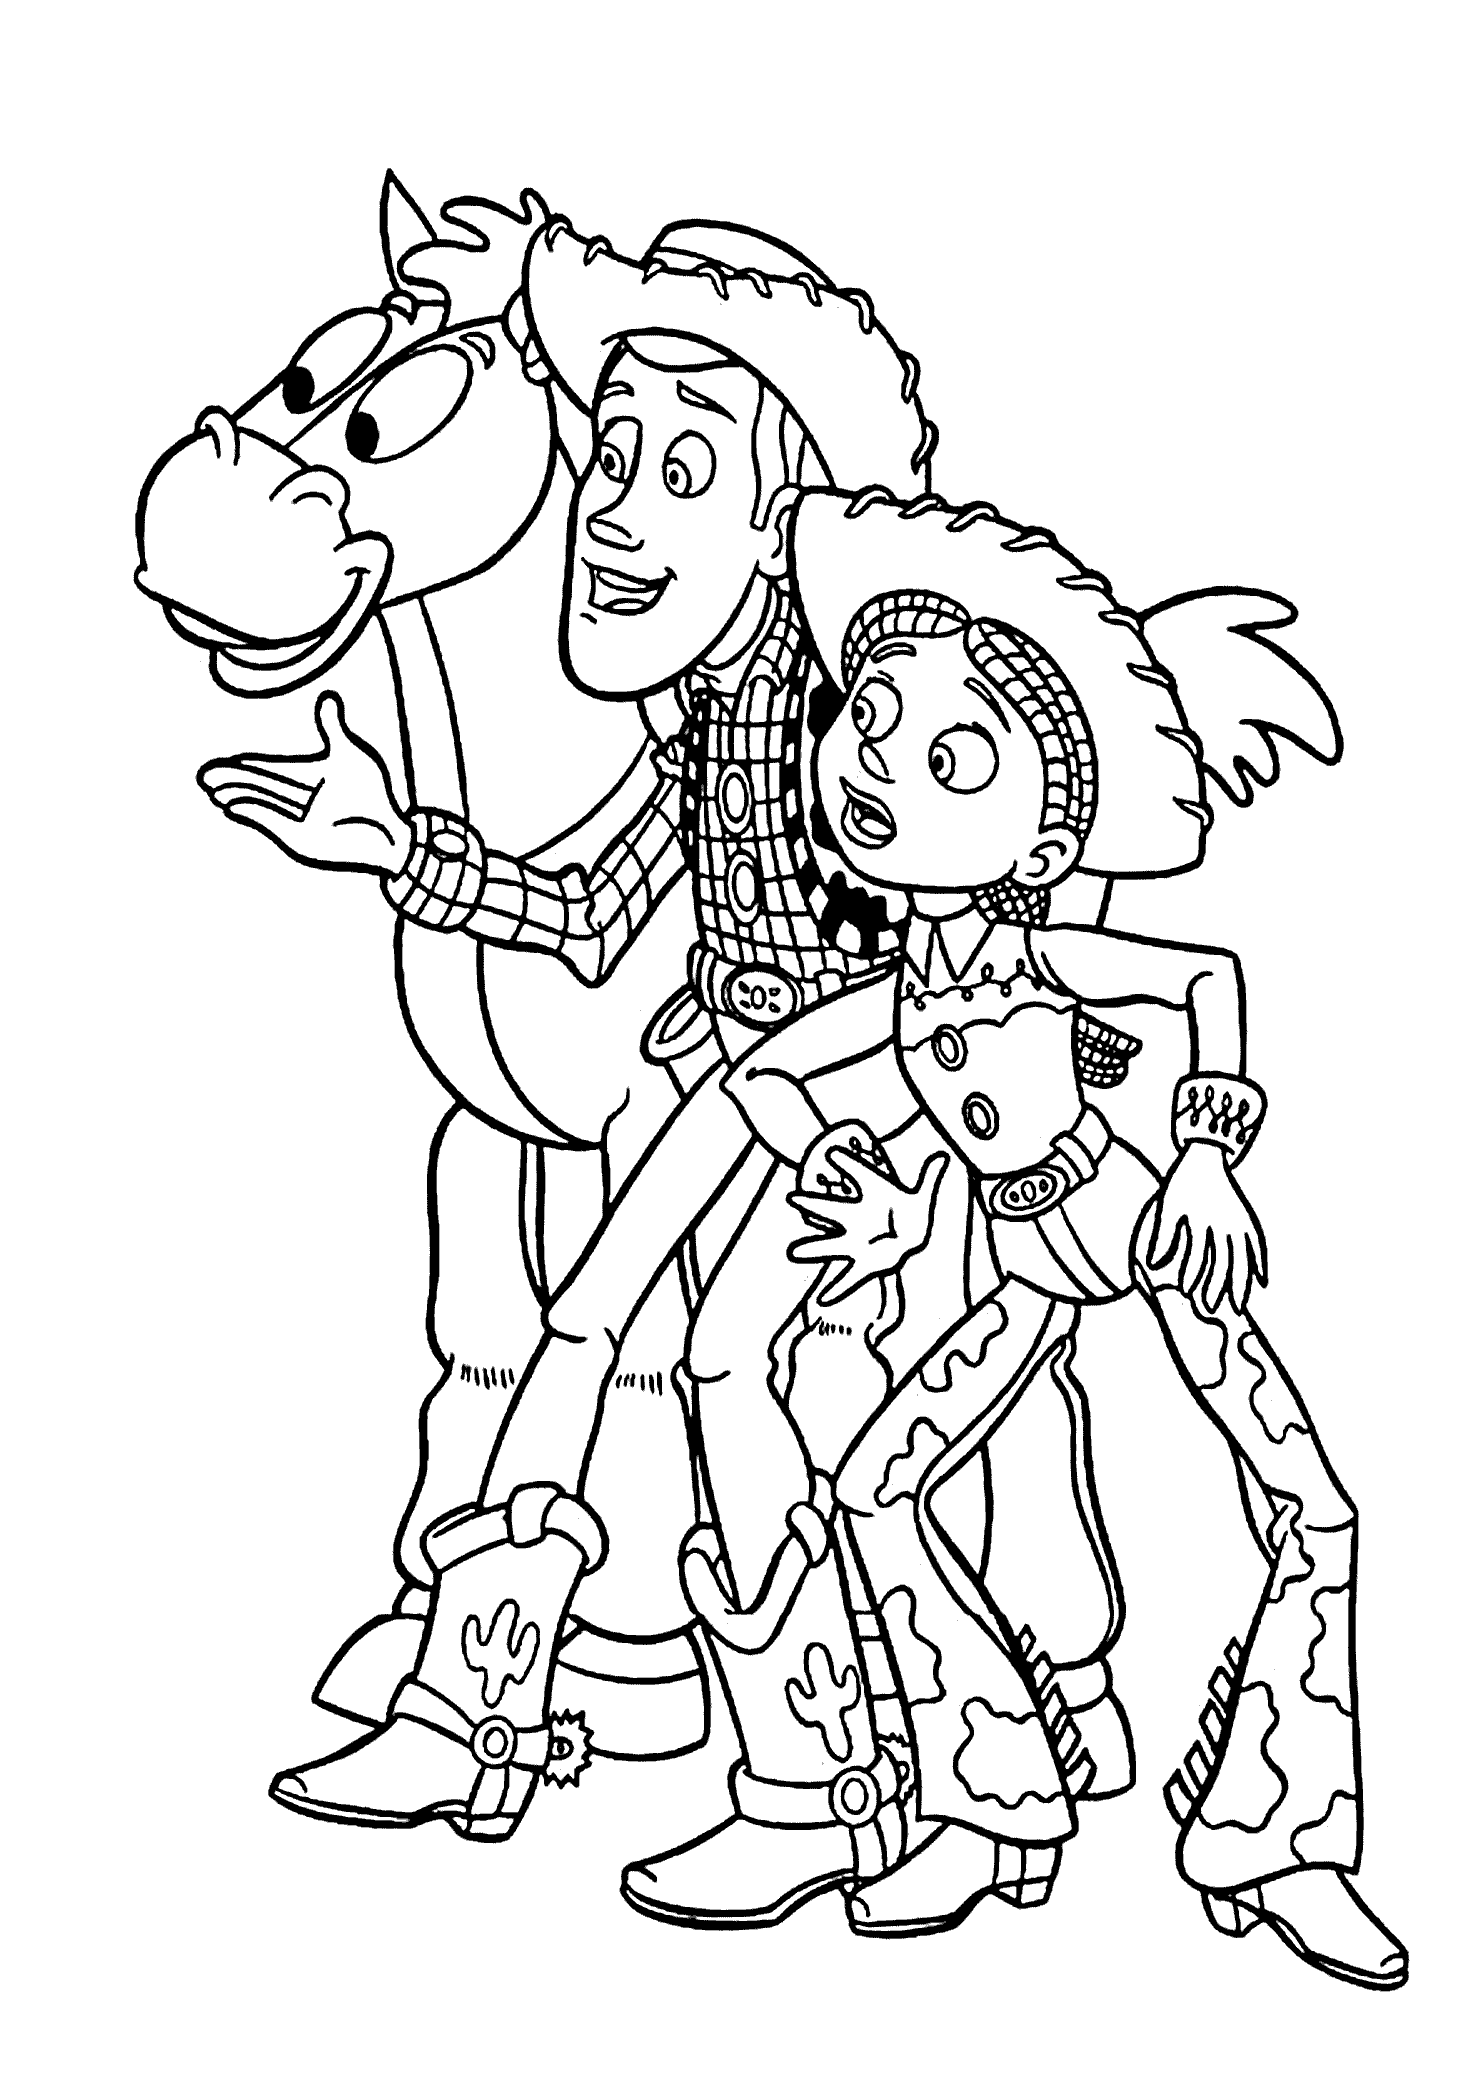 Woody, Jessie and Bullseye Coloring Page